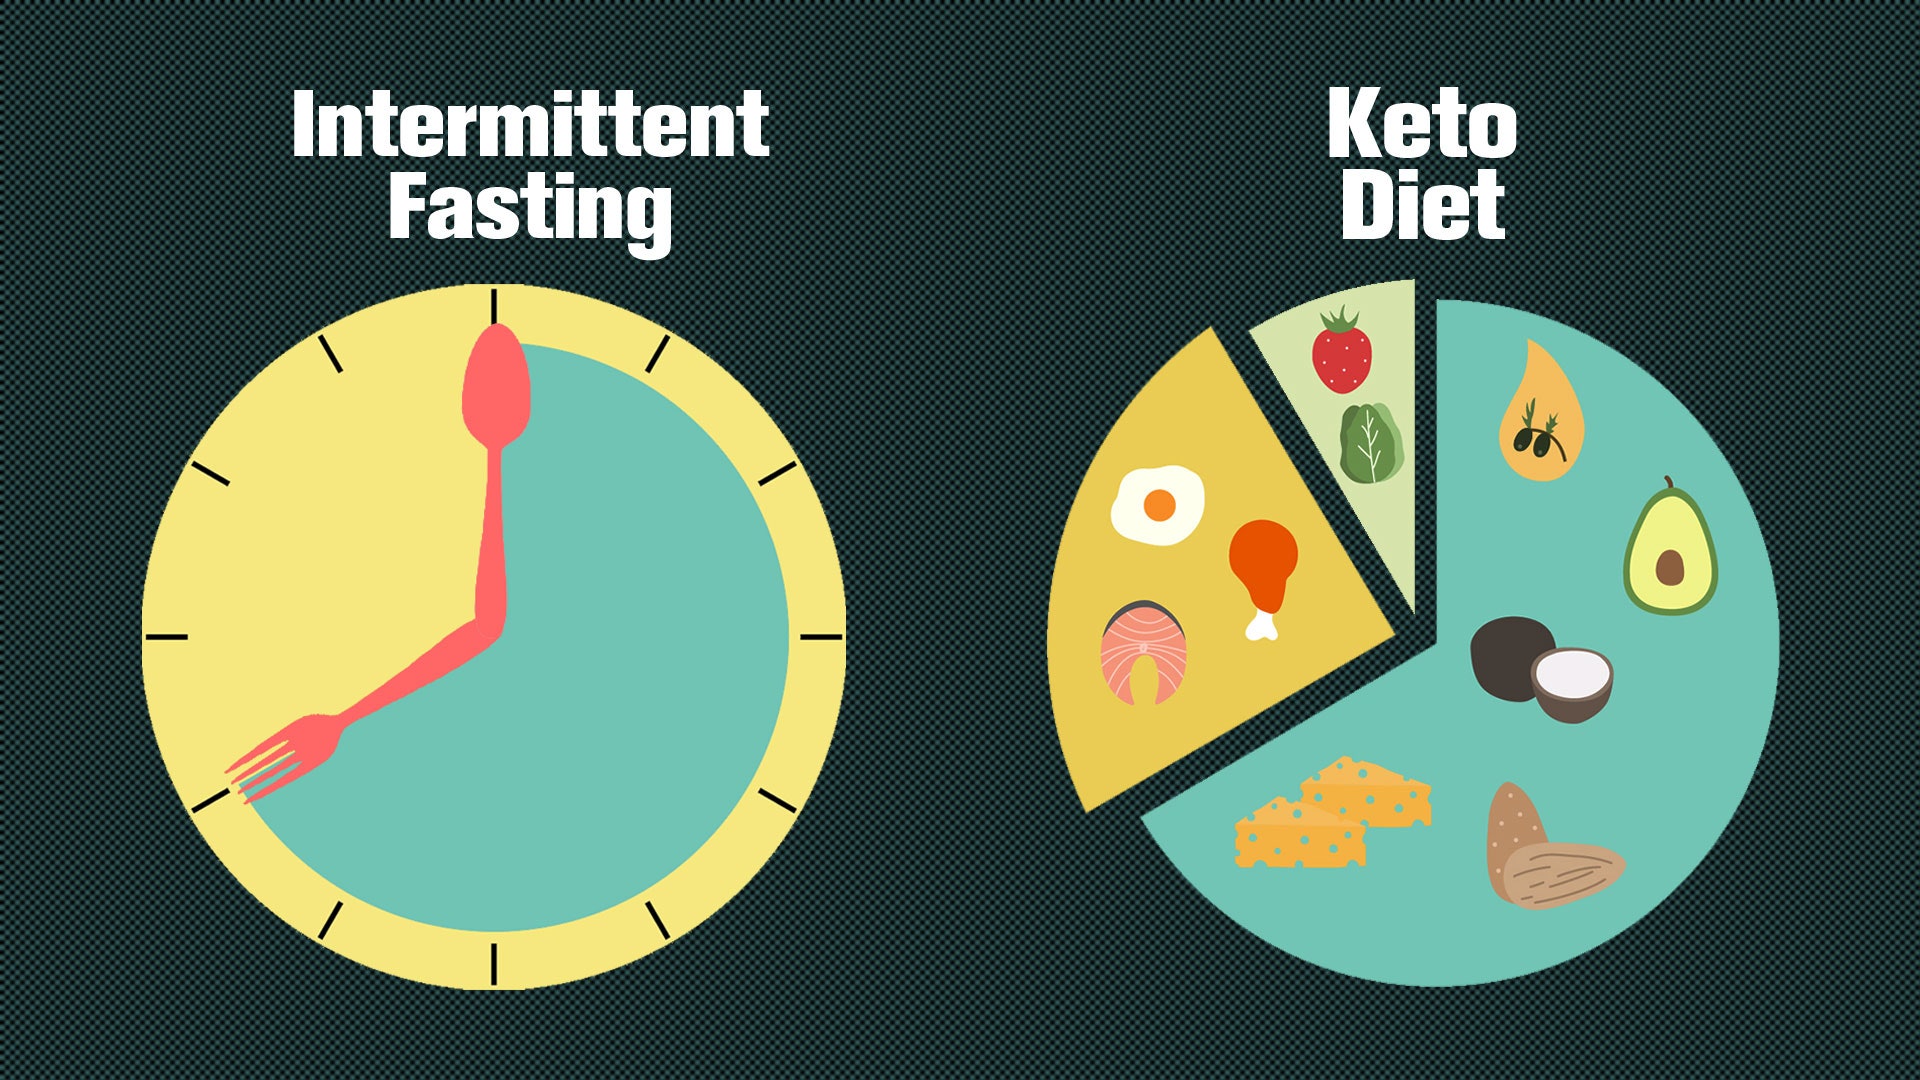 Is Intermittent Fasting or Keto Better?